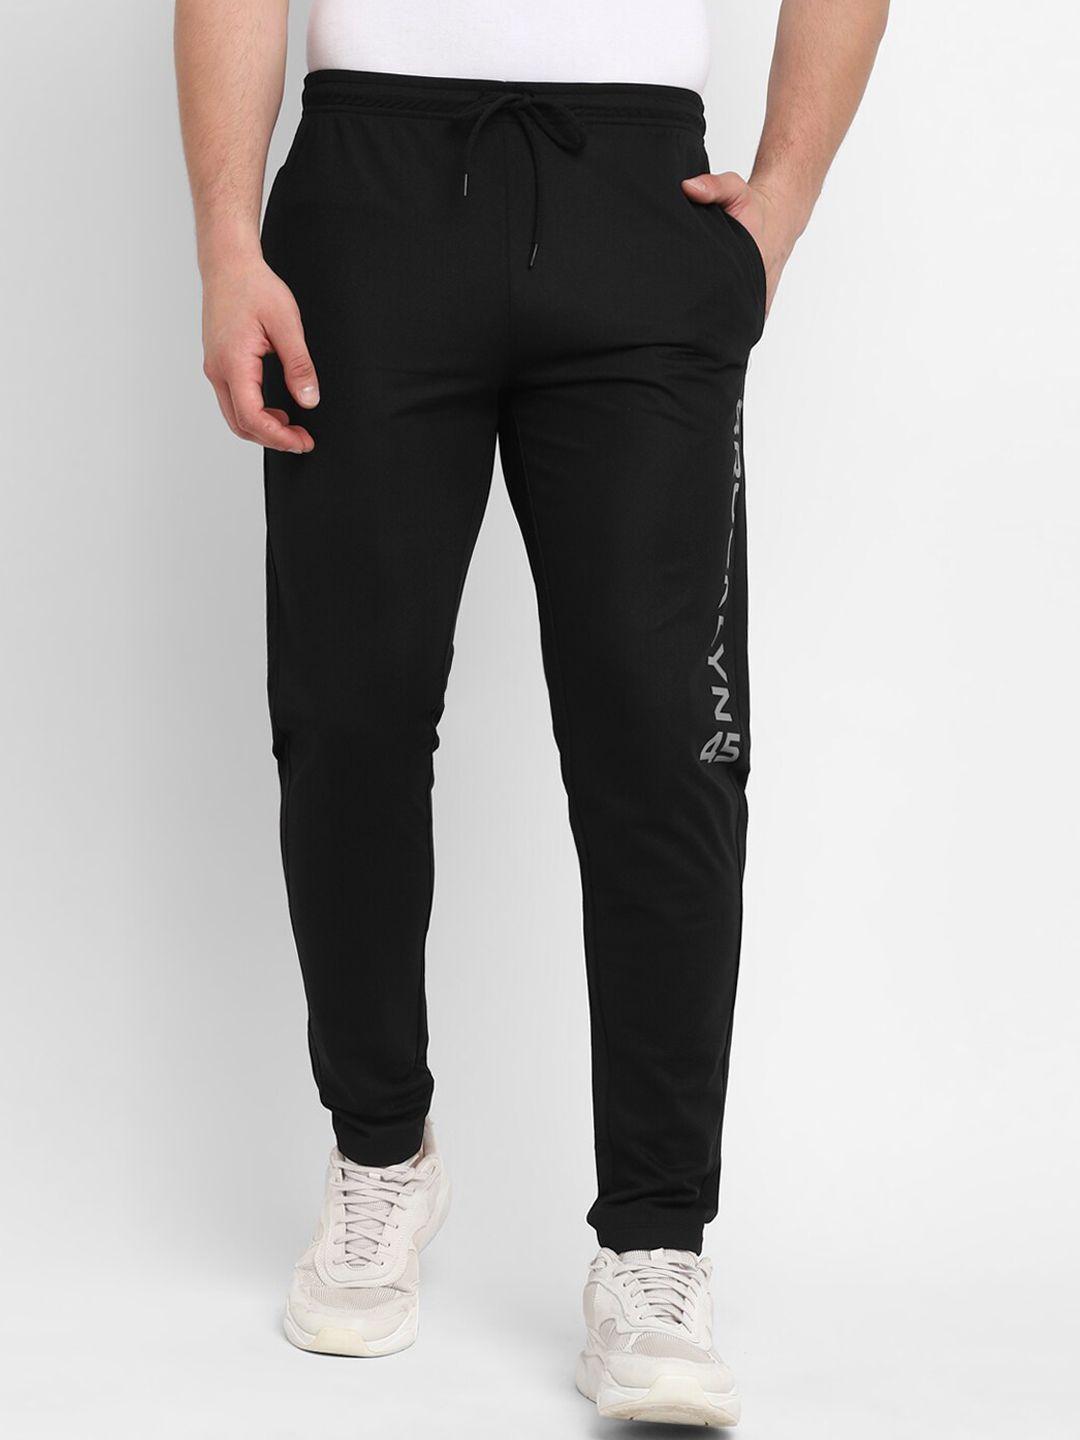 off-limits-men-typography-printed-joggers